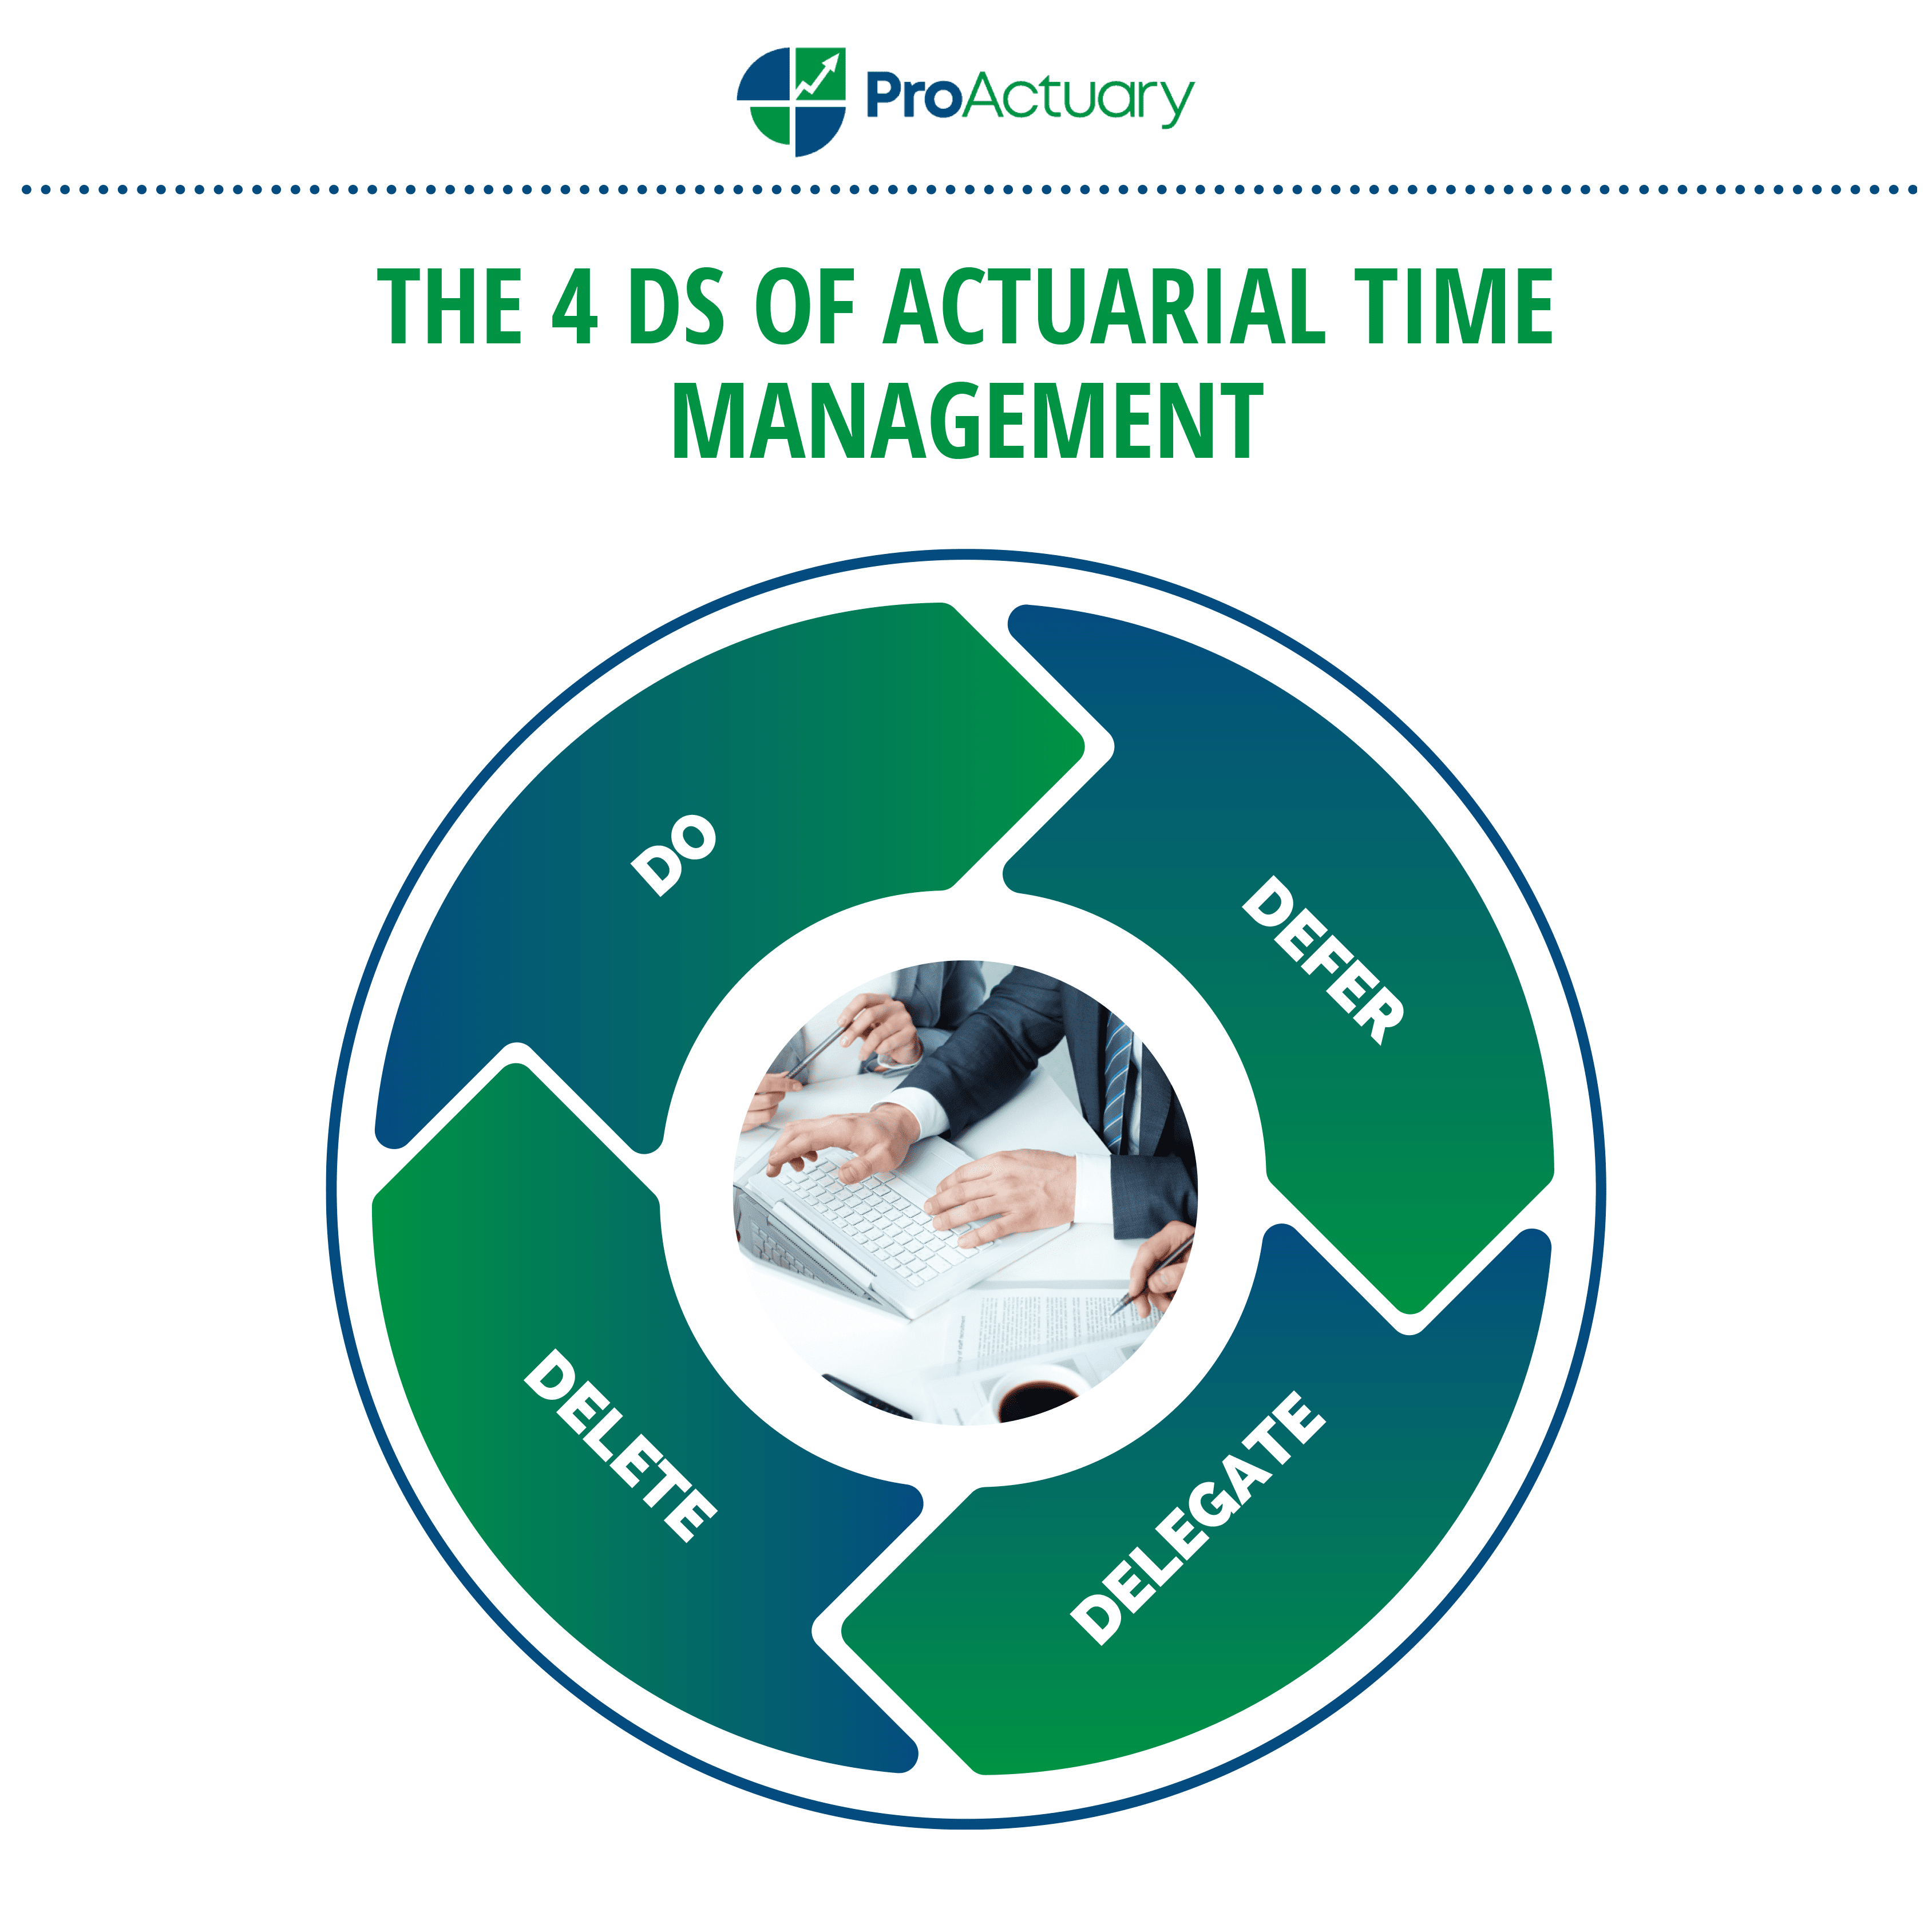 4 Ds of Actuarial Time Management